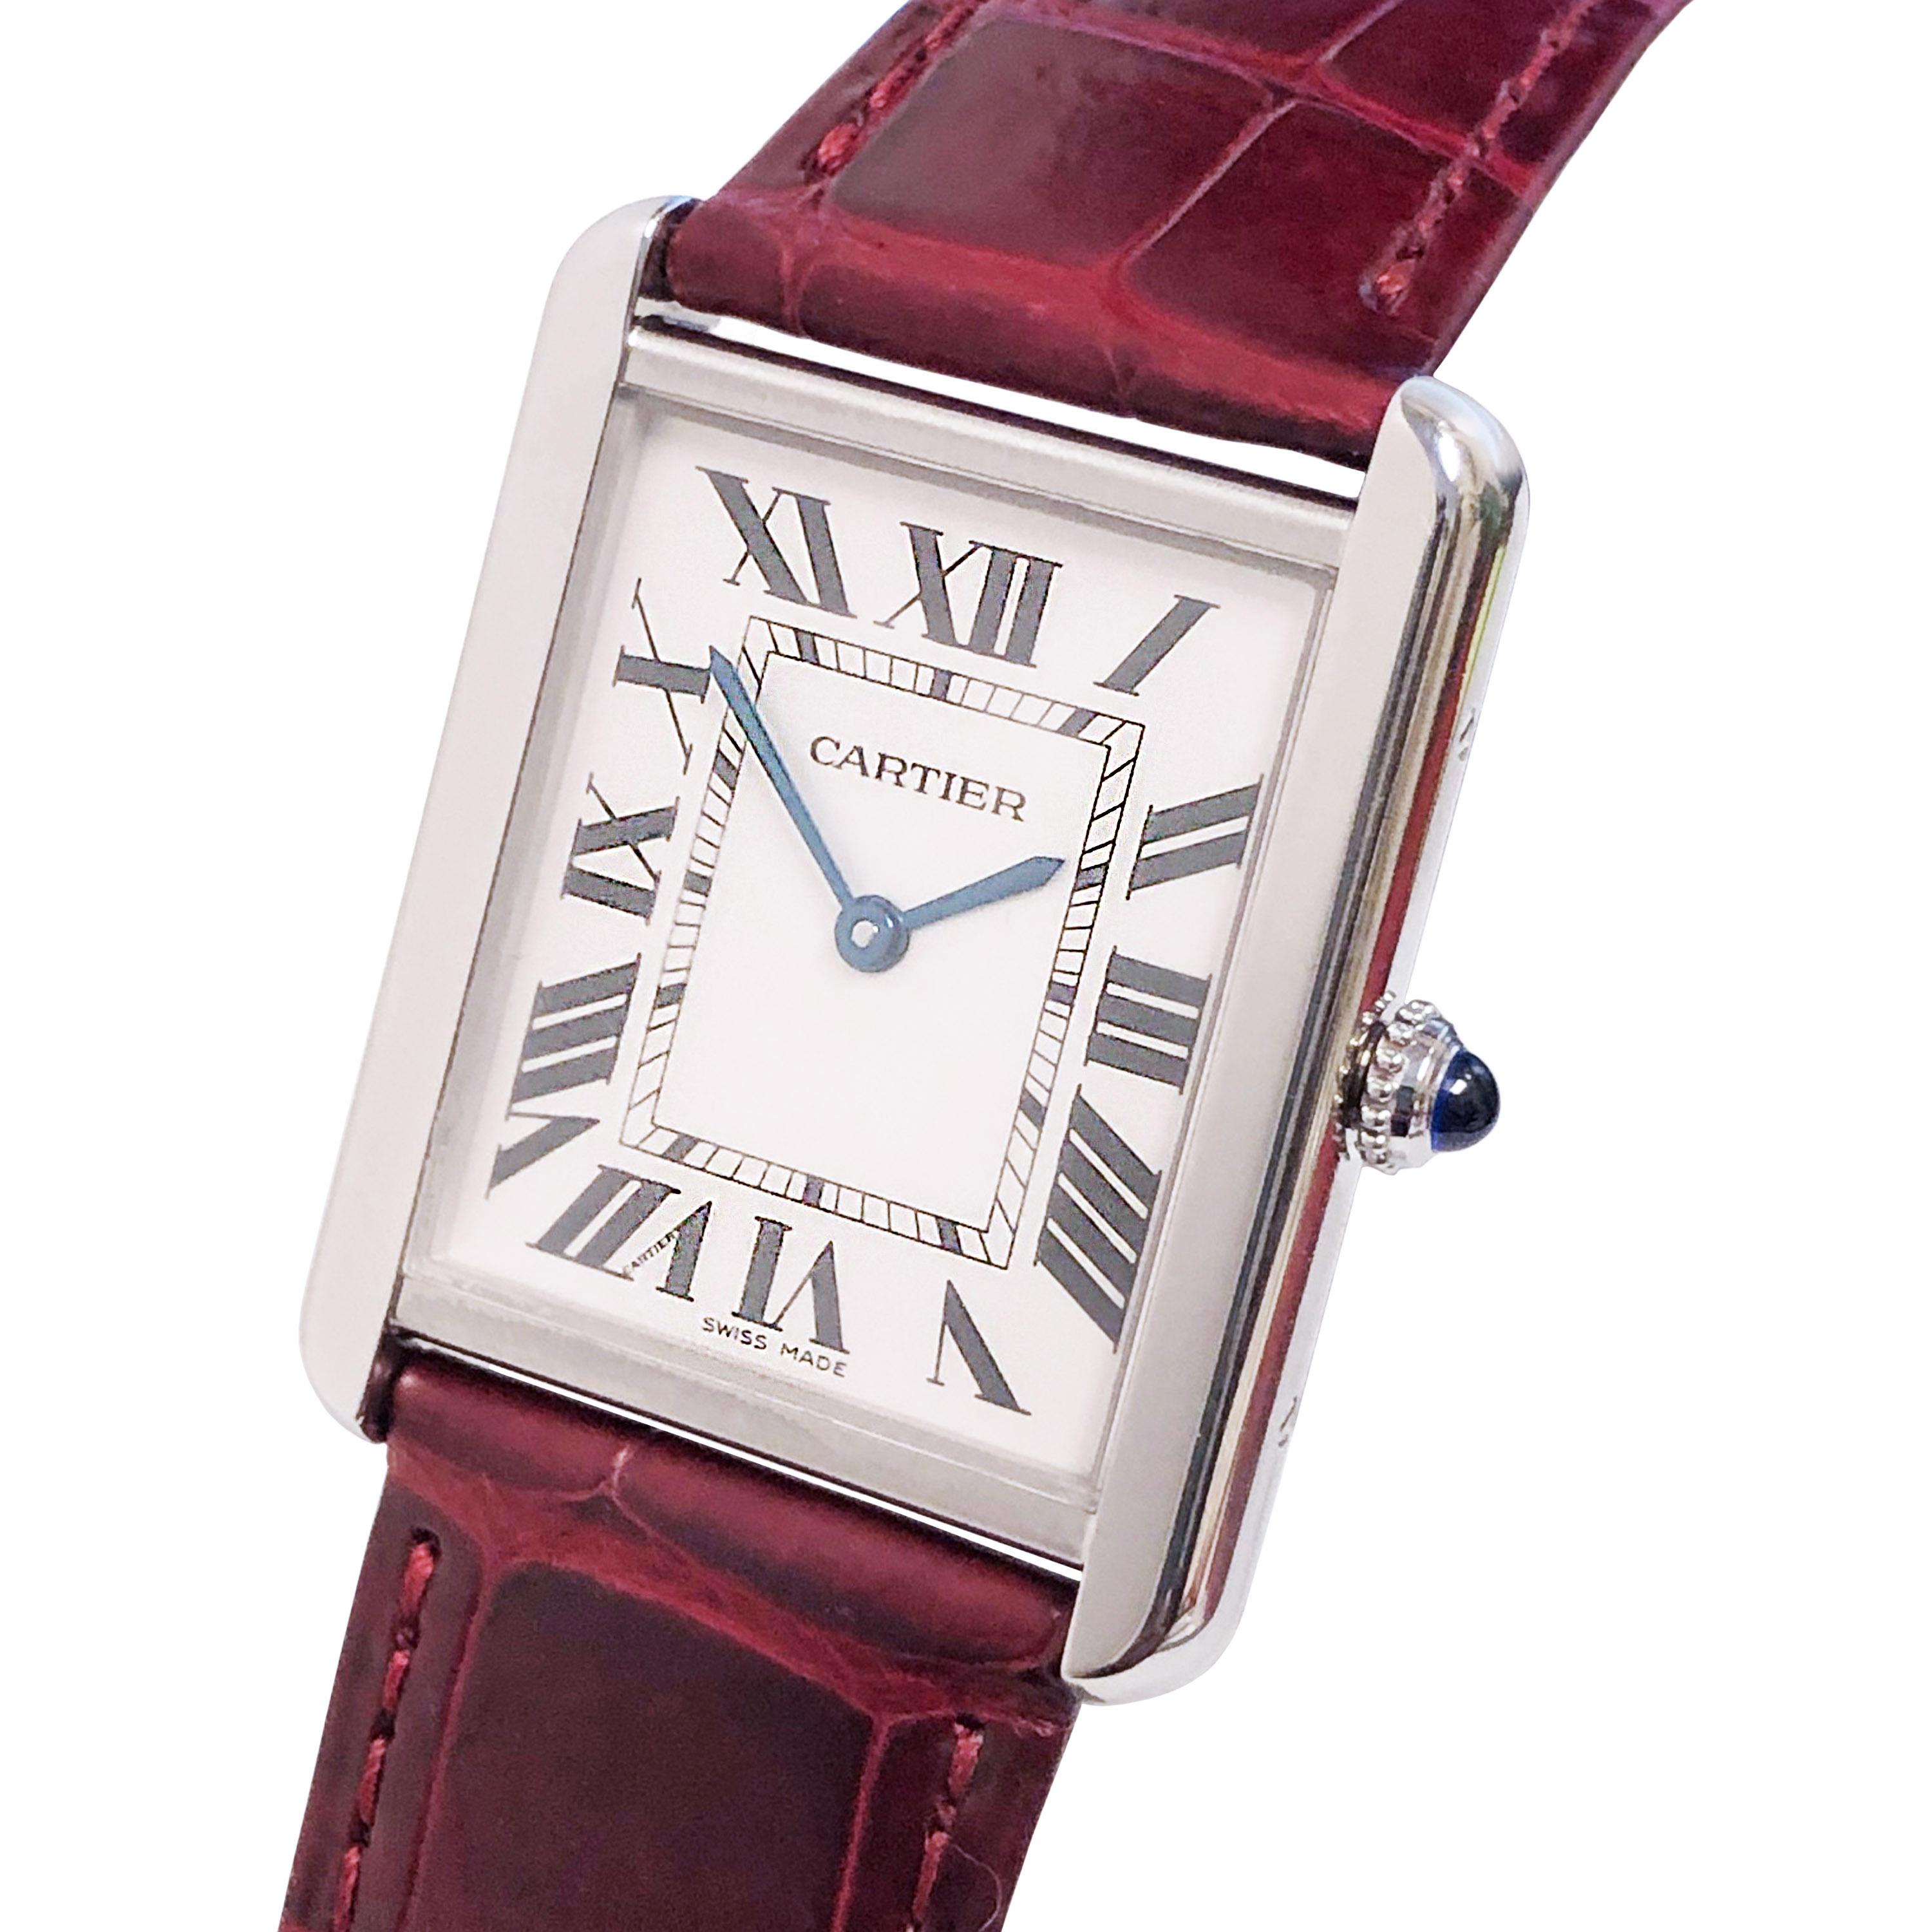 Circa 2014 Cartier Tank Solo Wrist Watch. 34 X 28 MM Stainless Steel Case, blue sapphire crown, Scratch resistant sapphire crystal. Quartz Movement. Silver Satin dial with Black Roman numerals. Sword shaped blued steel hands including a sweep